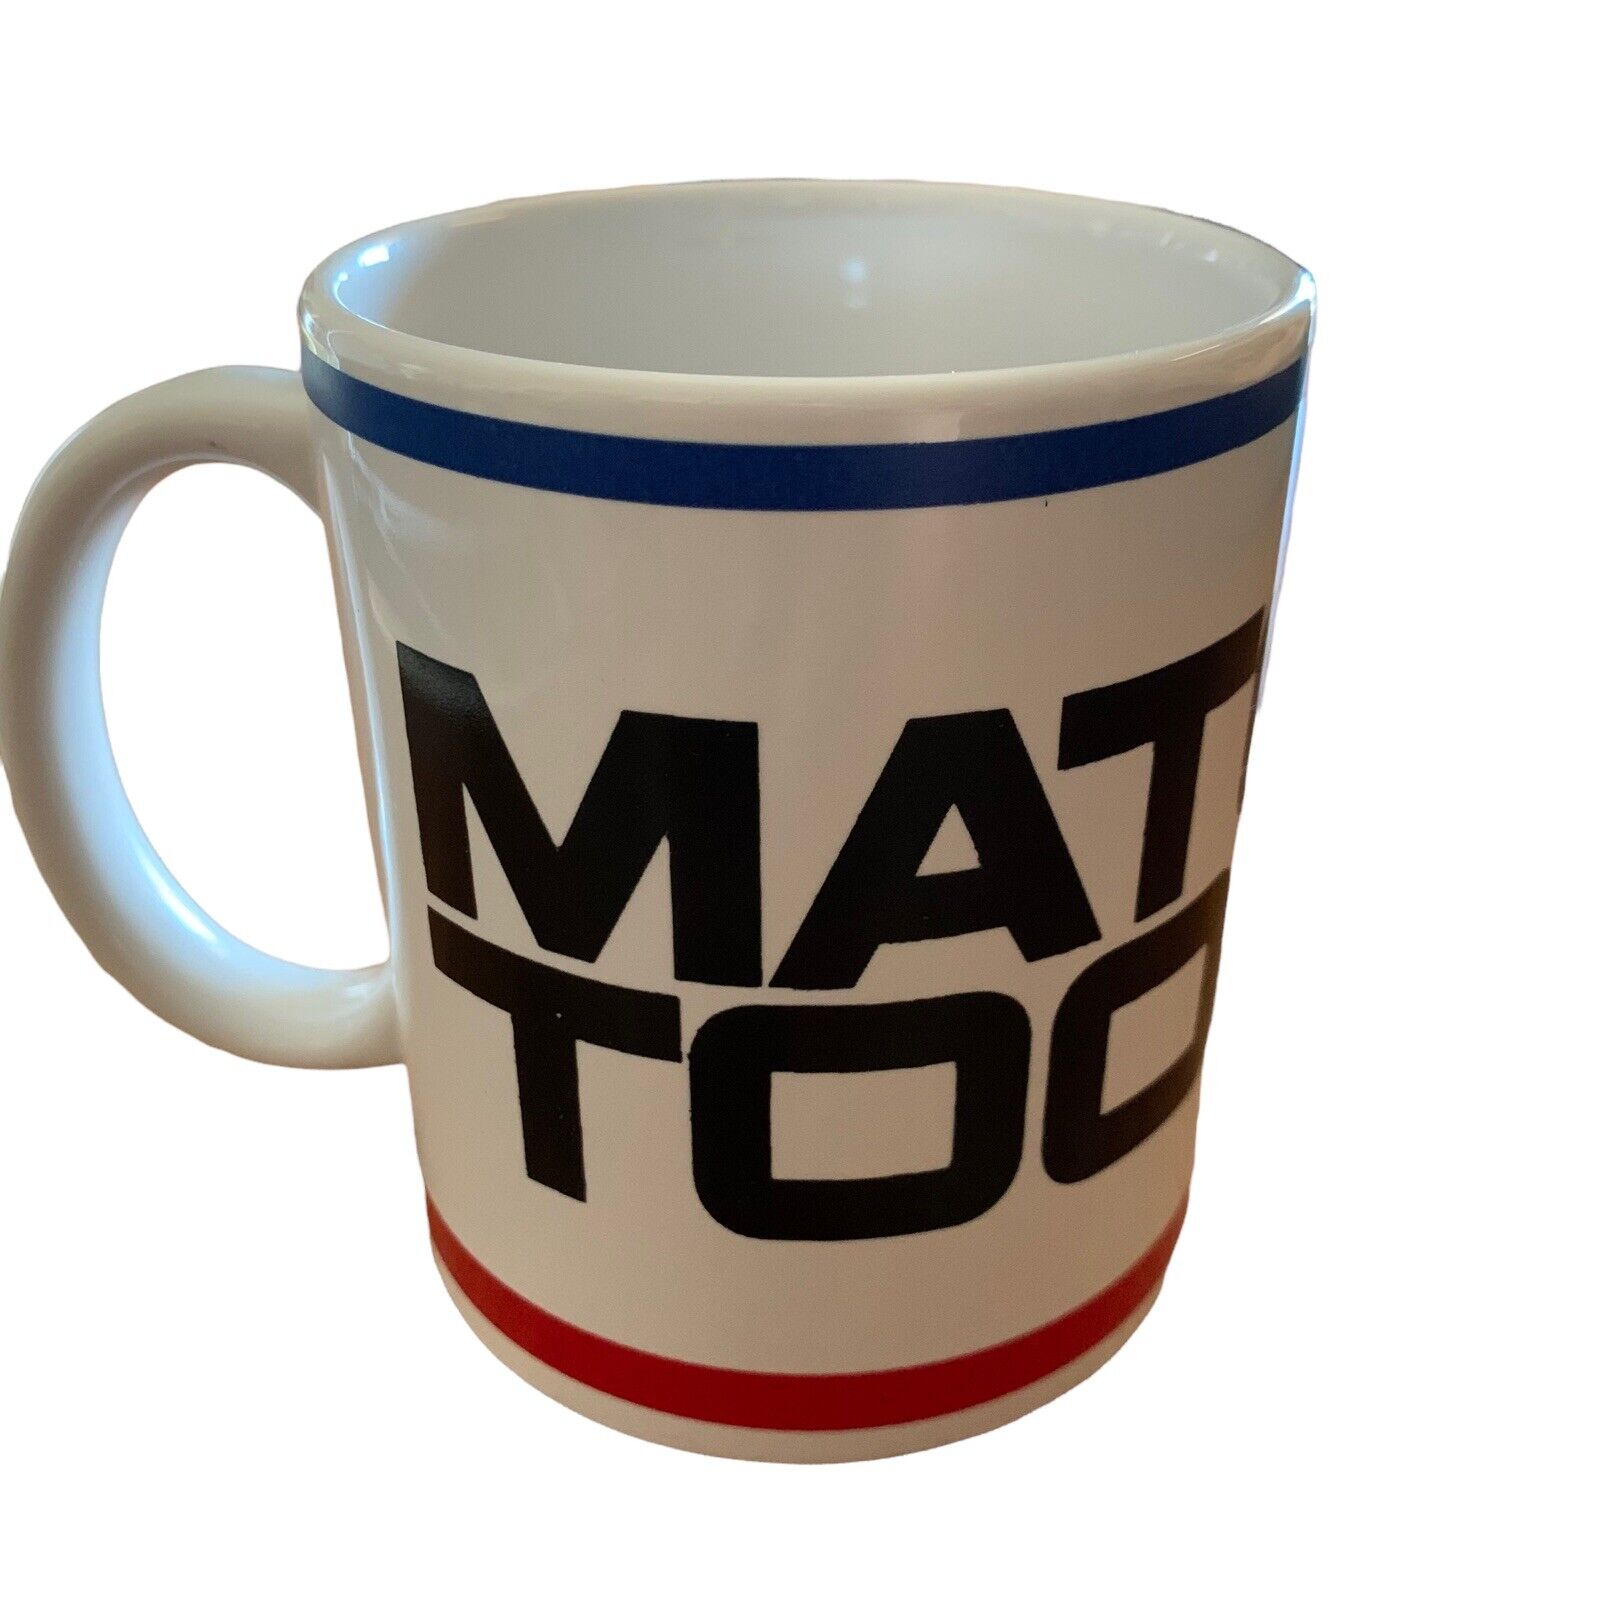 Matco Tools Coffee Tea Mug Cup White Background and Blue Black Red Graphics